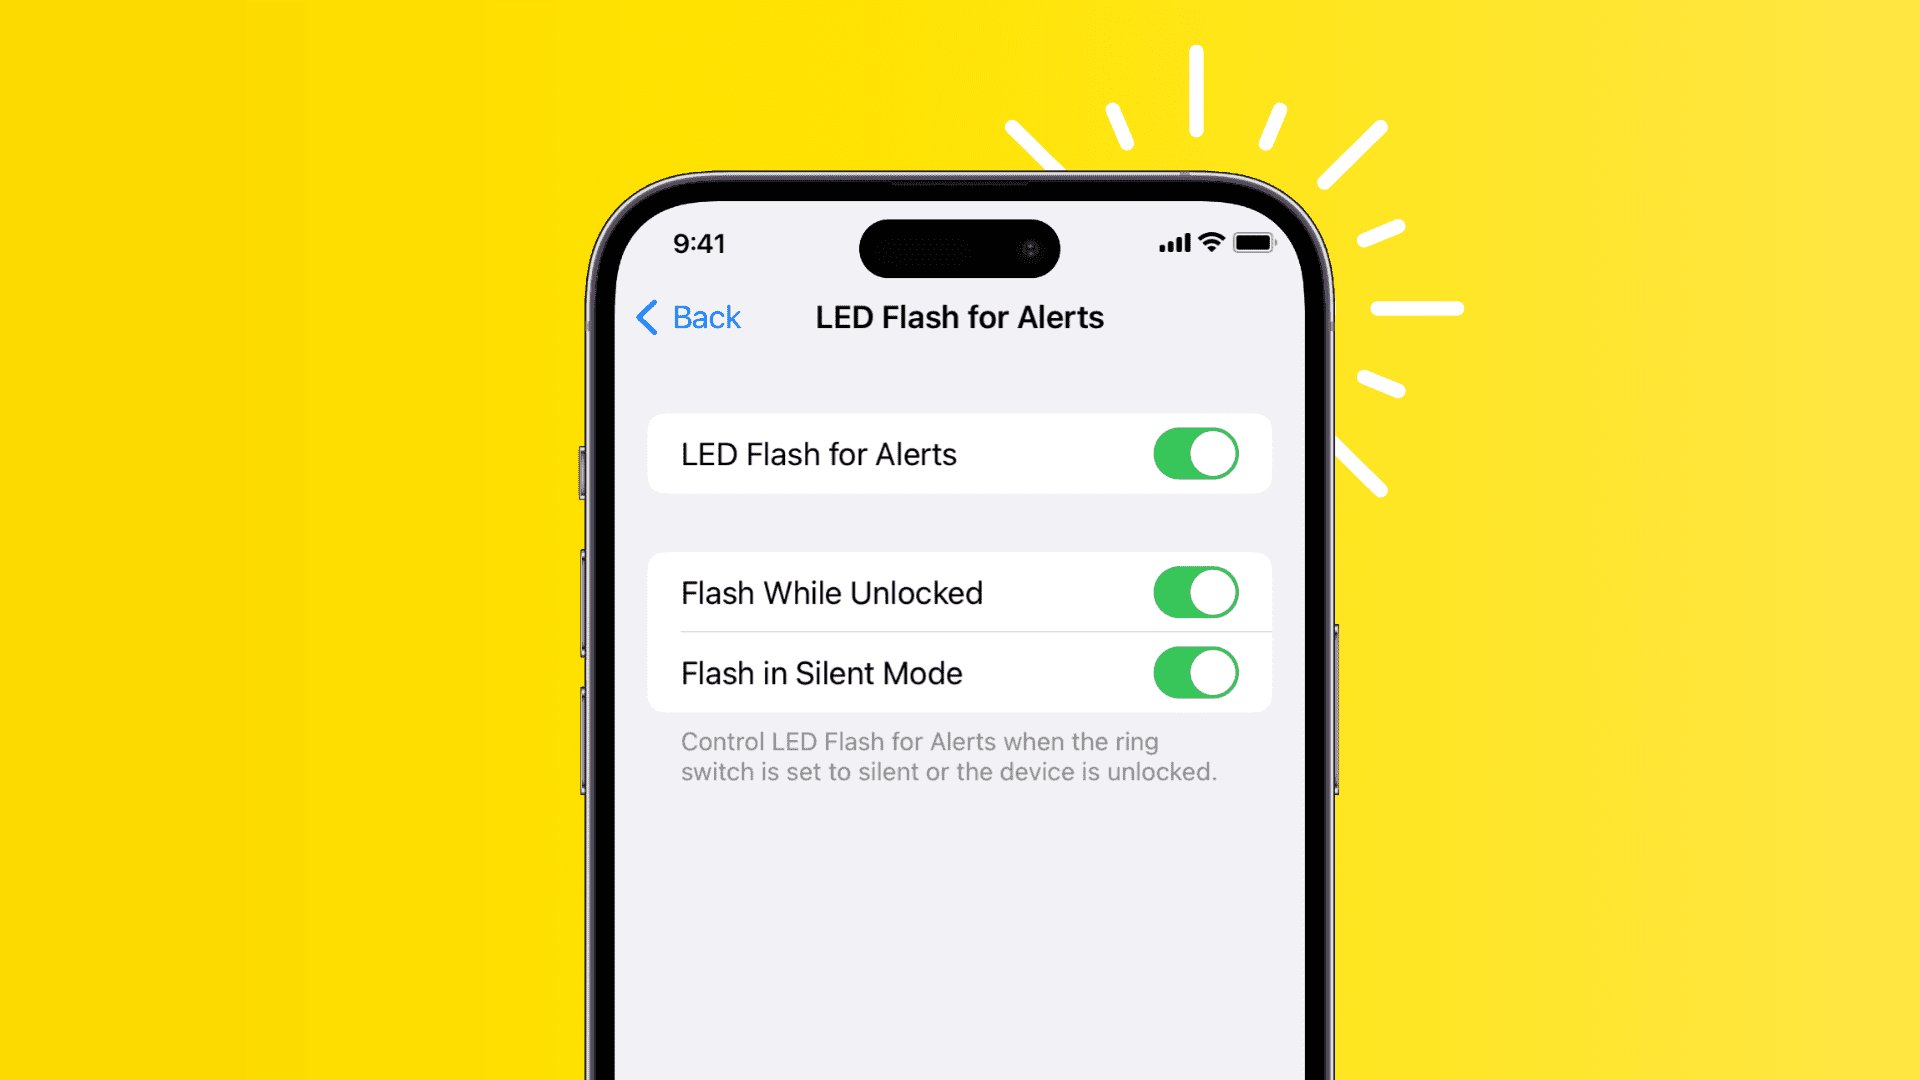 Use LED Flash Alerts on Your iPhone So You Never Miss Another